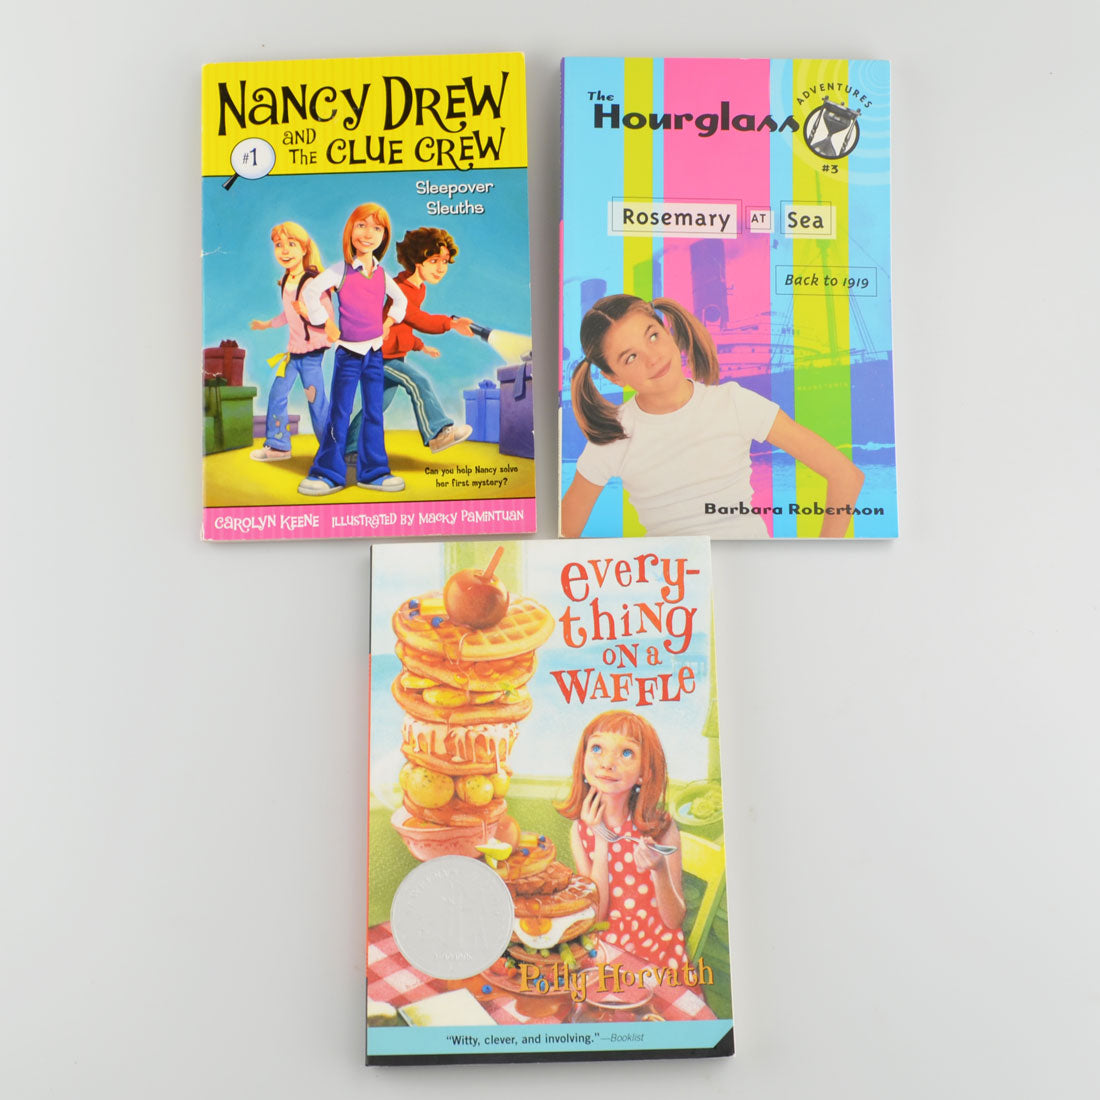 Lot of 3 Nancy Drew and the Clue Crew - Sleepover Sleuths by Carolyn Keene PLUS